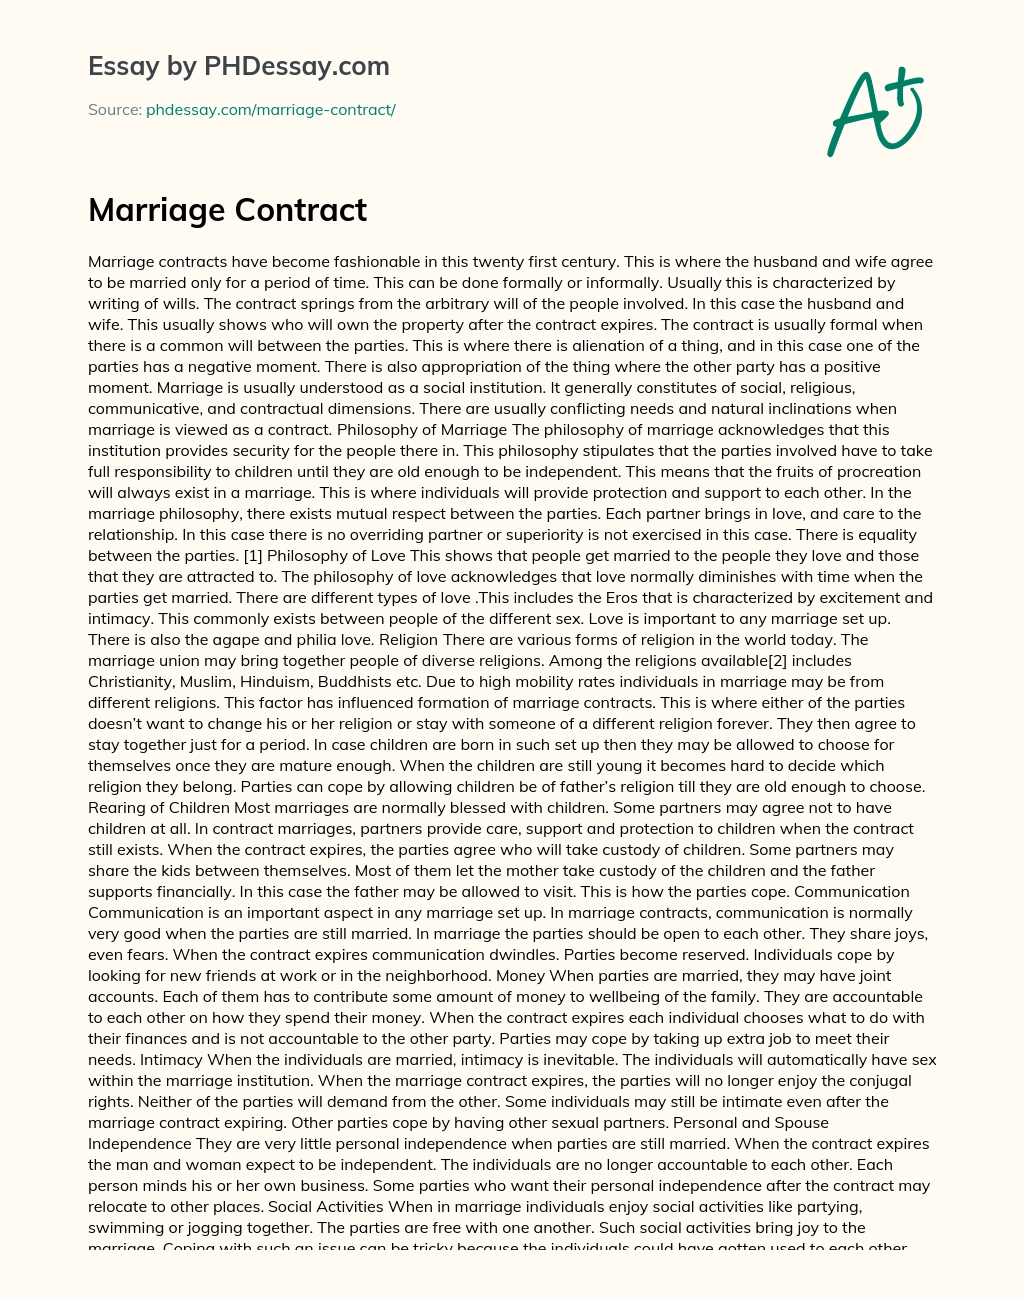 Marriage Contract essay